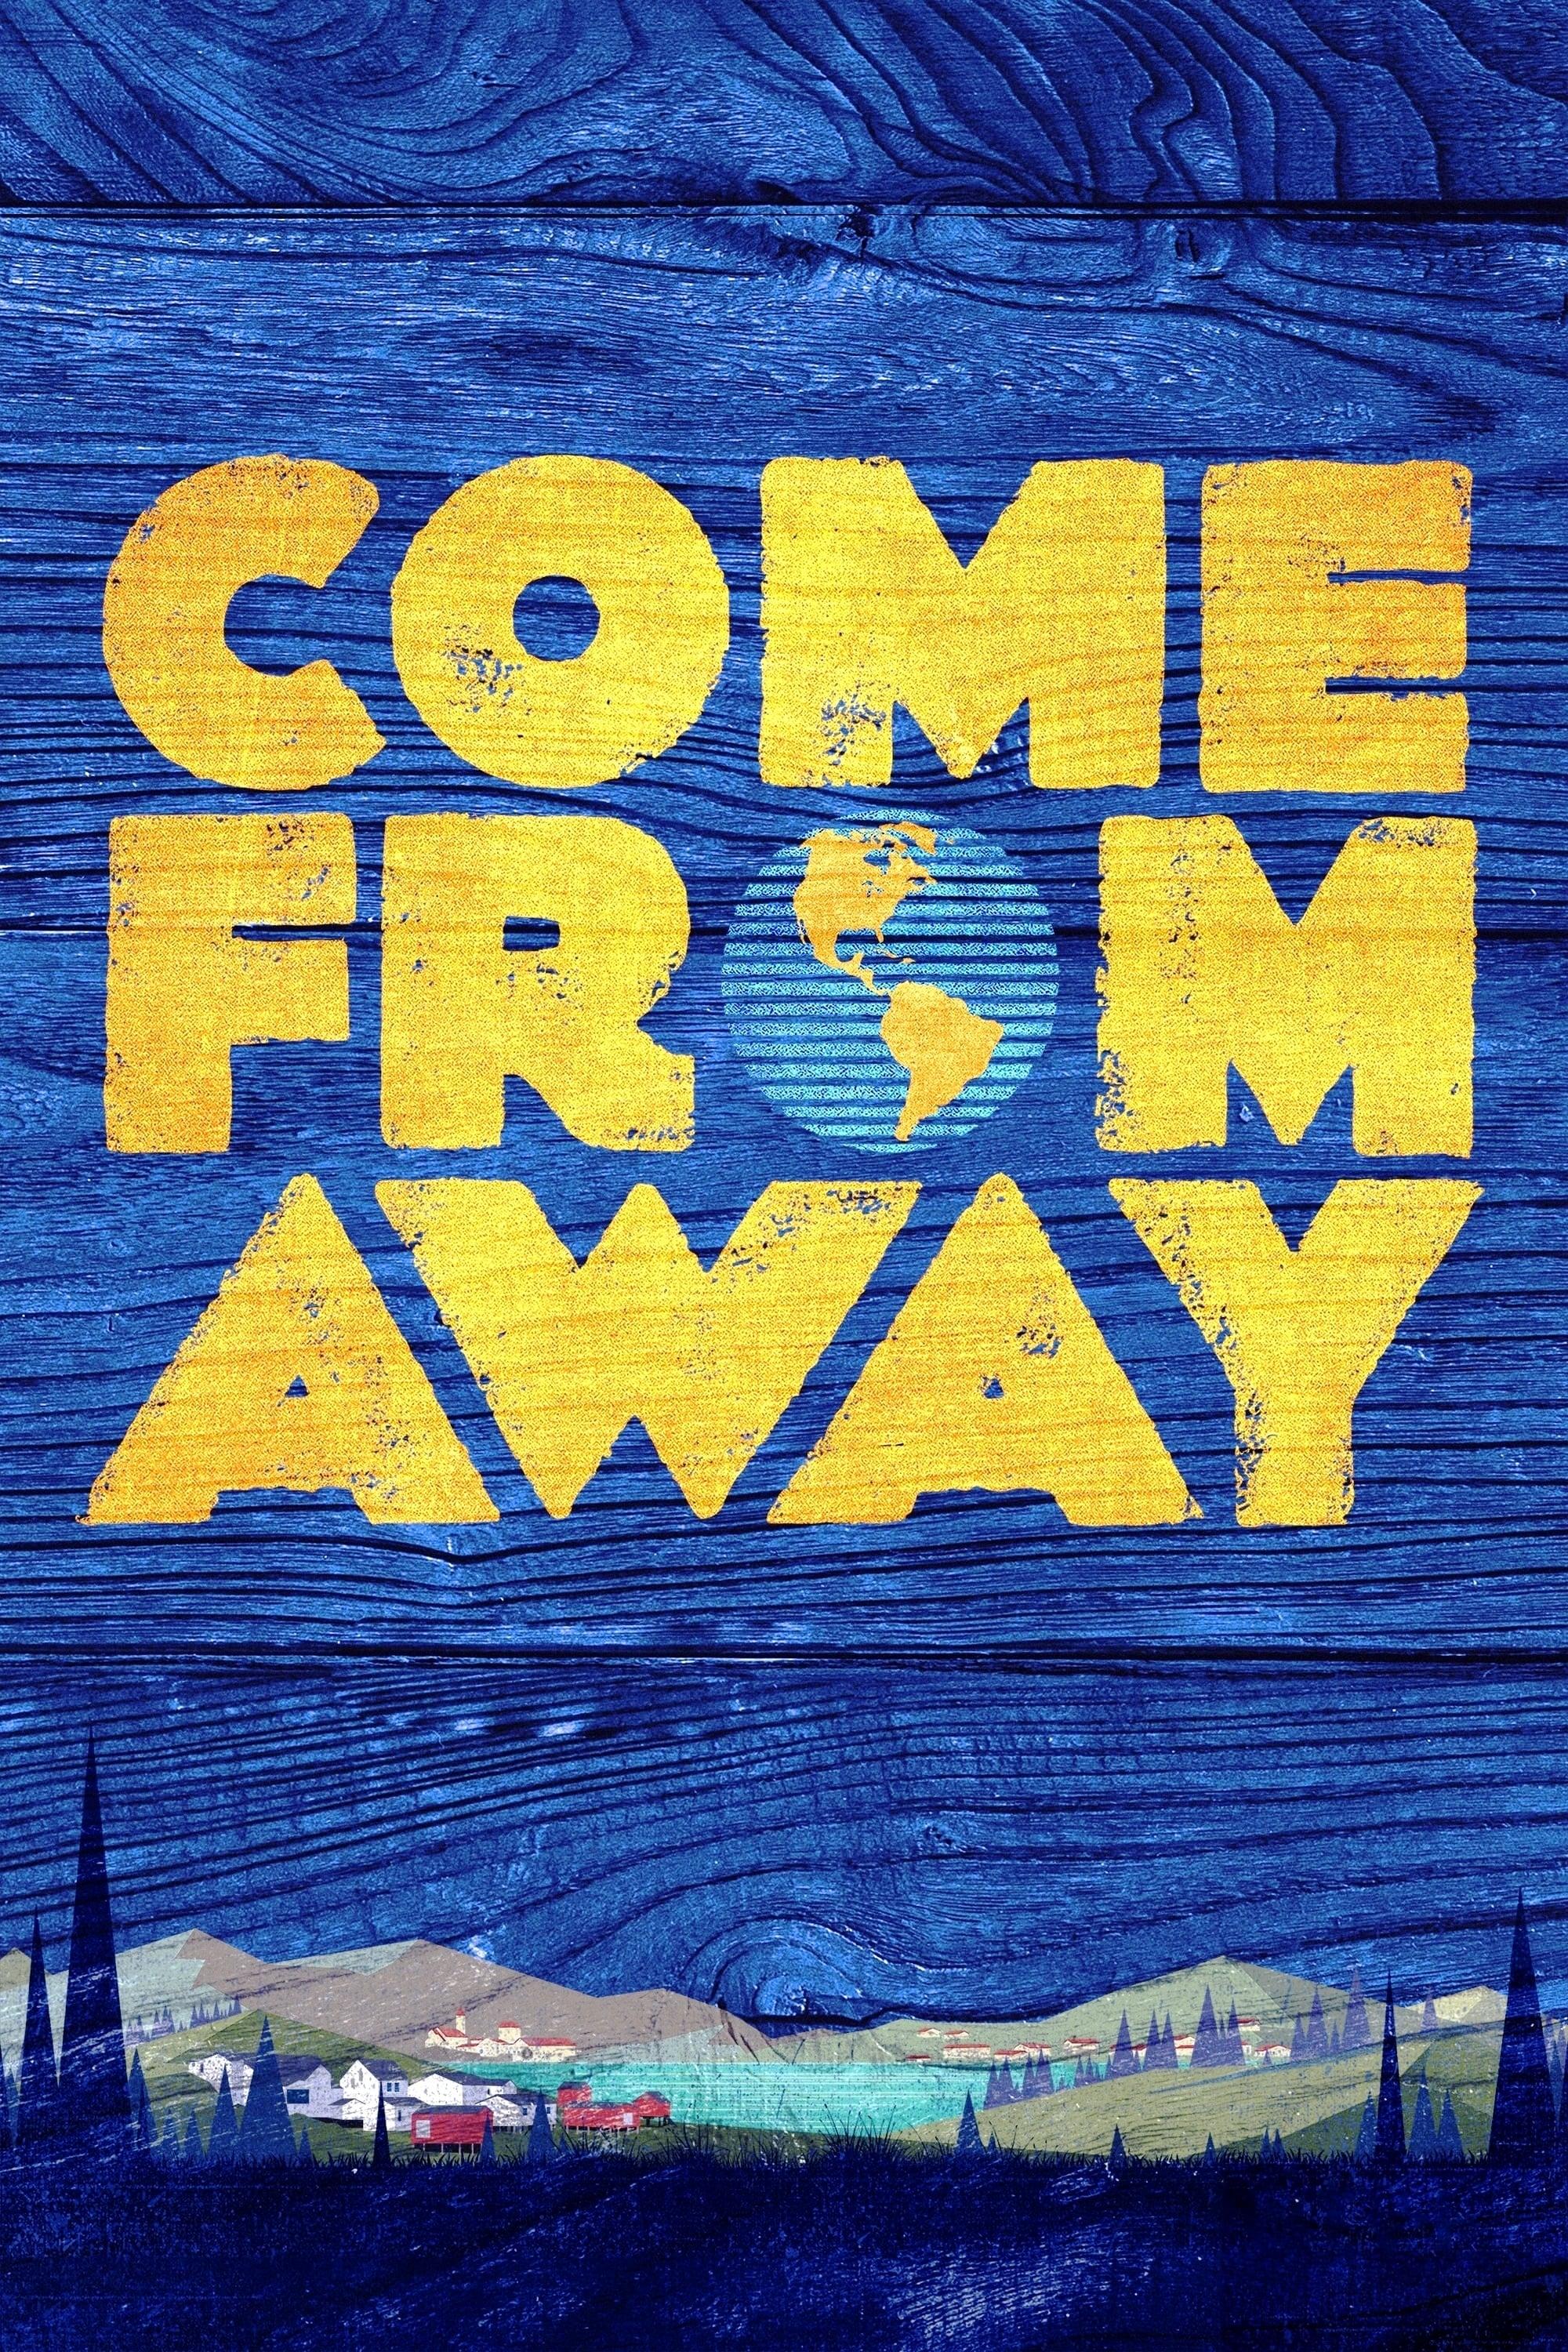 Come from Away poster